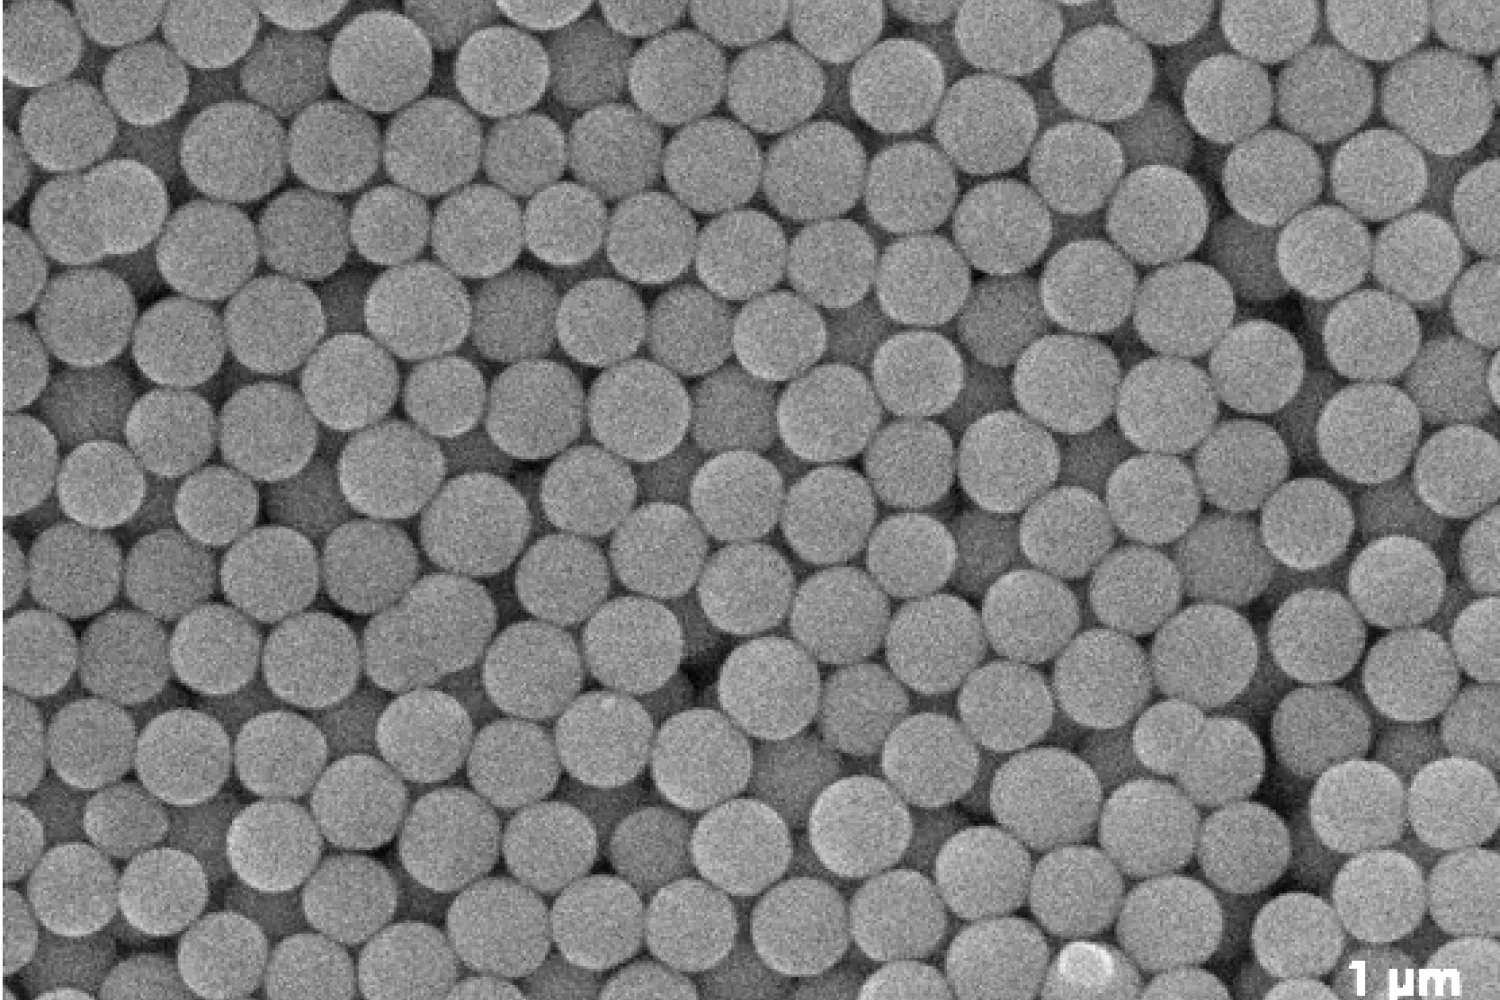 Scanning Electron Microscope image of colloidal particles